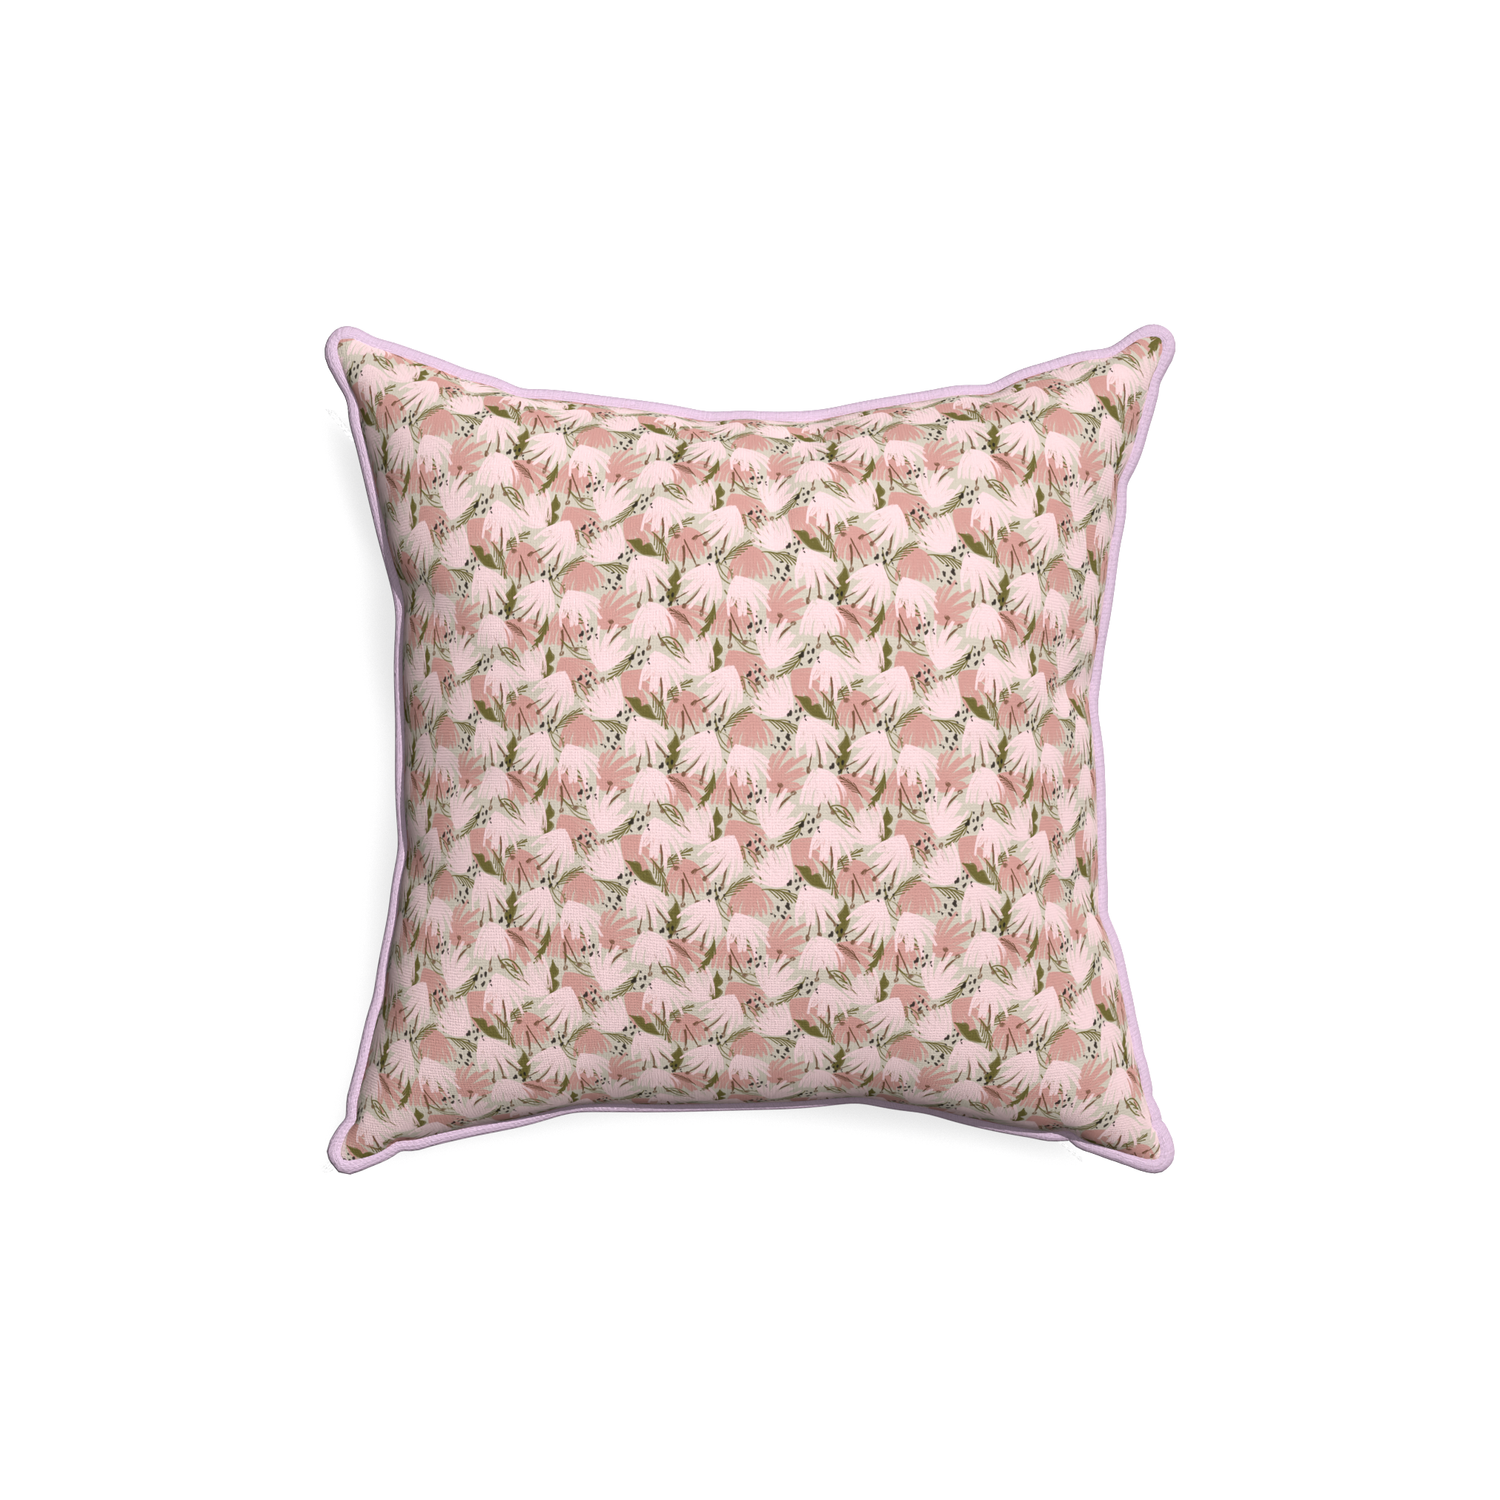 18-square eden pink custom pillow with l piping on white background